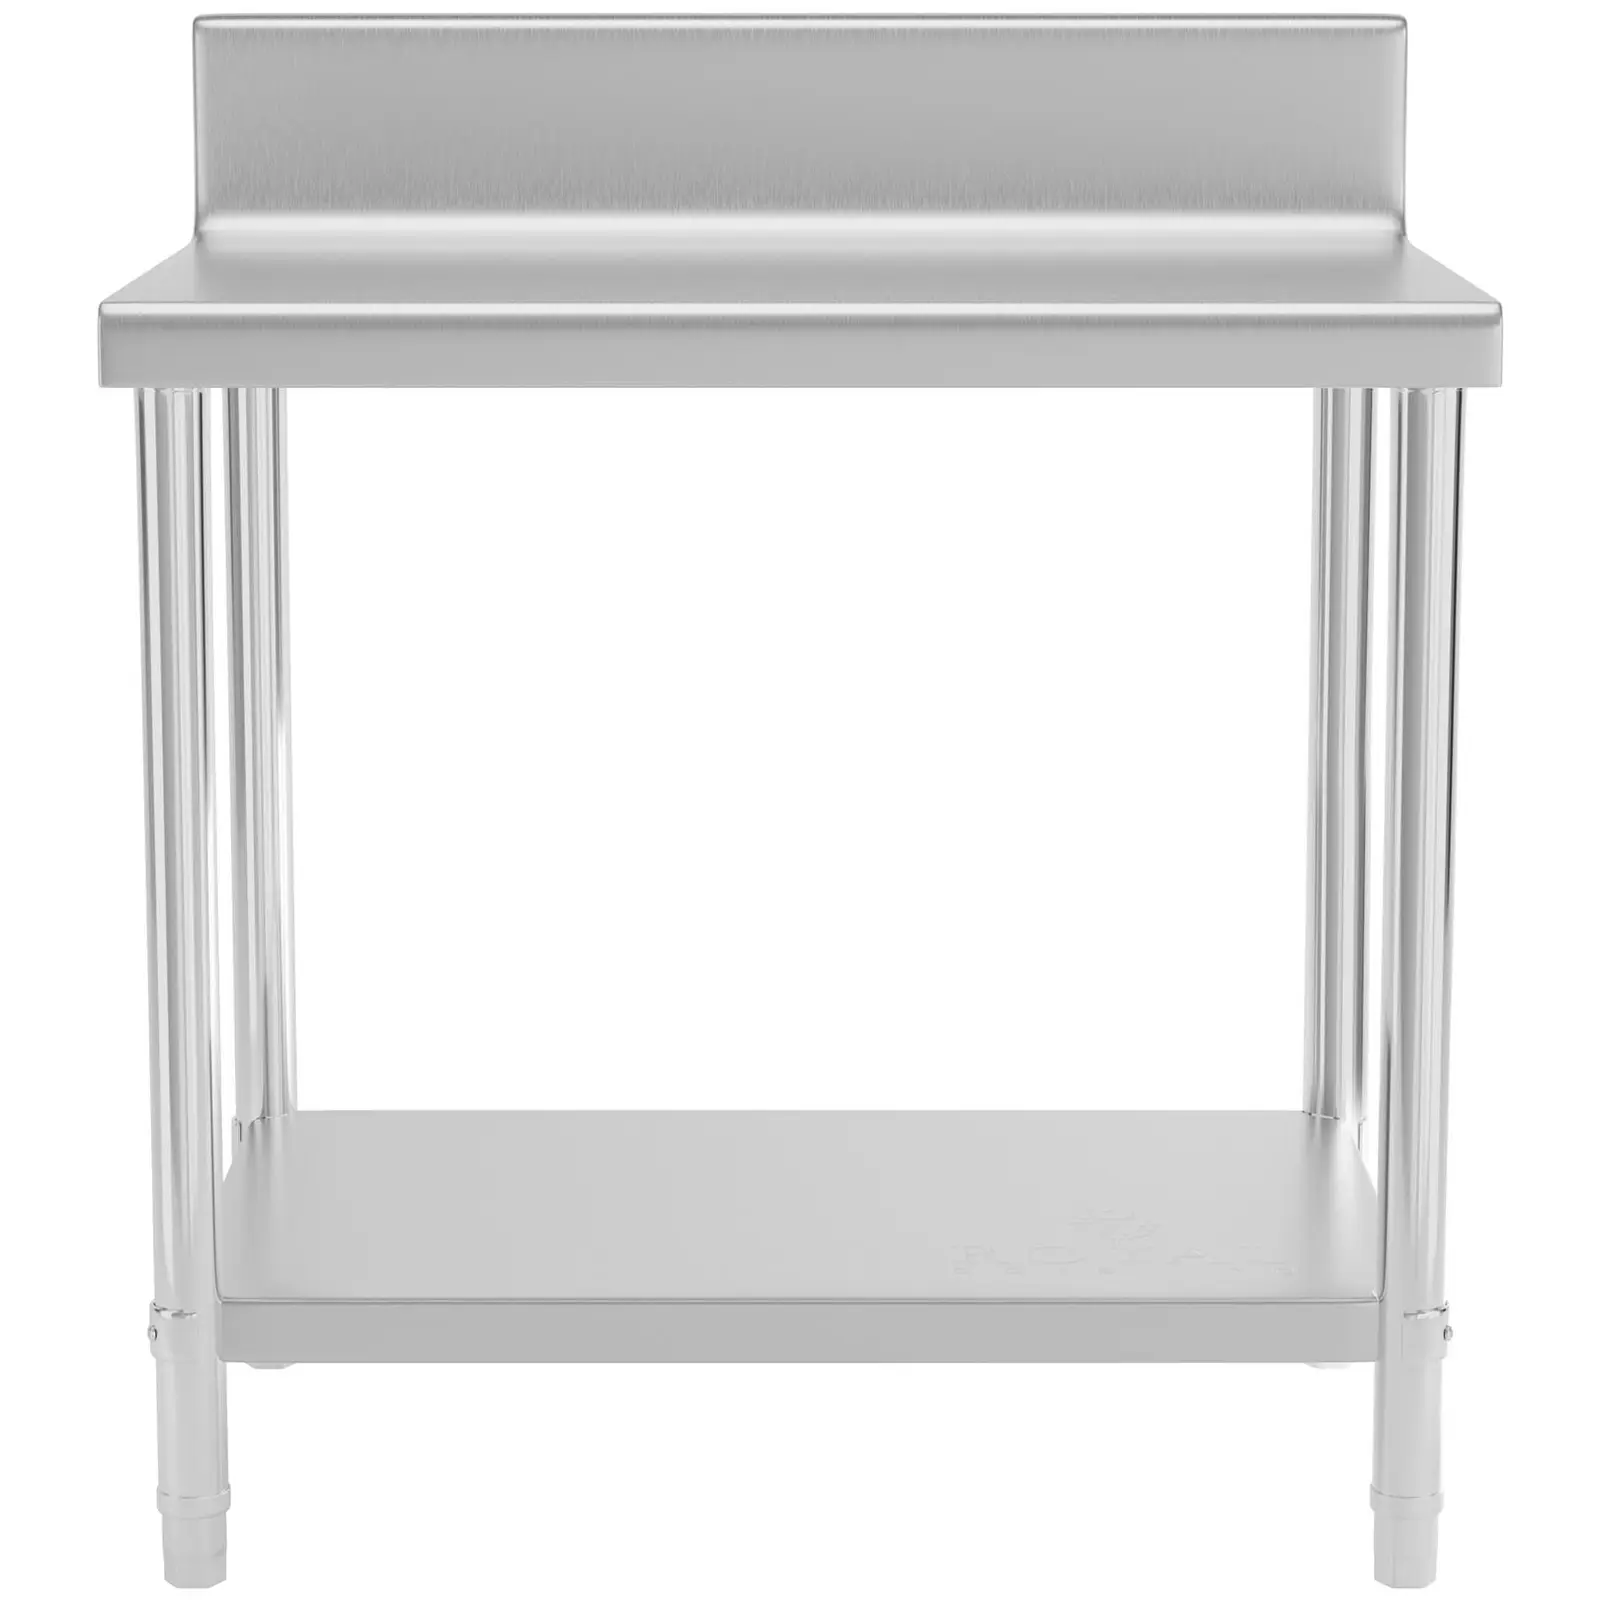 Stainless Steel Work Table - 90 x 60 cm - upstand - 210 kg load capacity